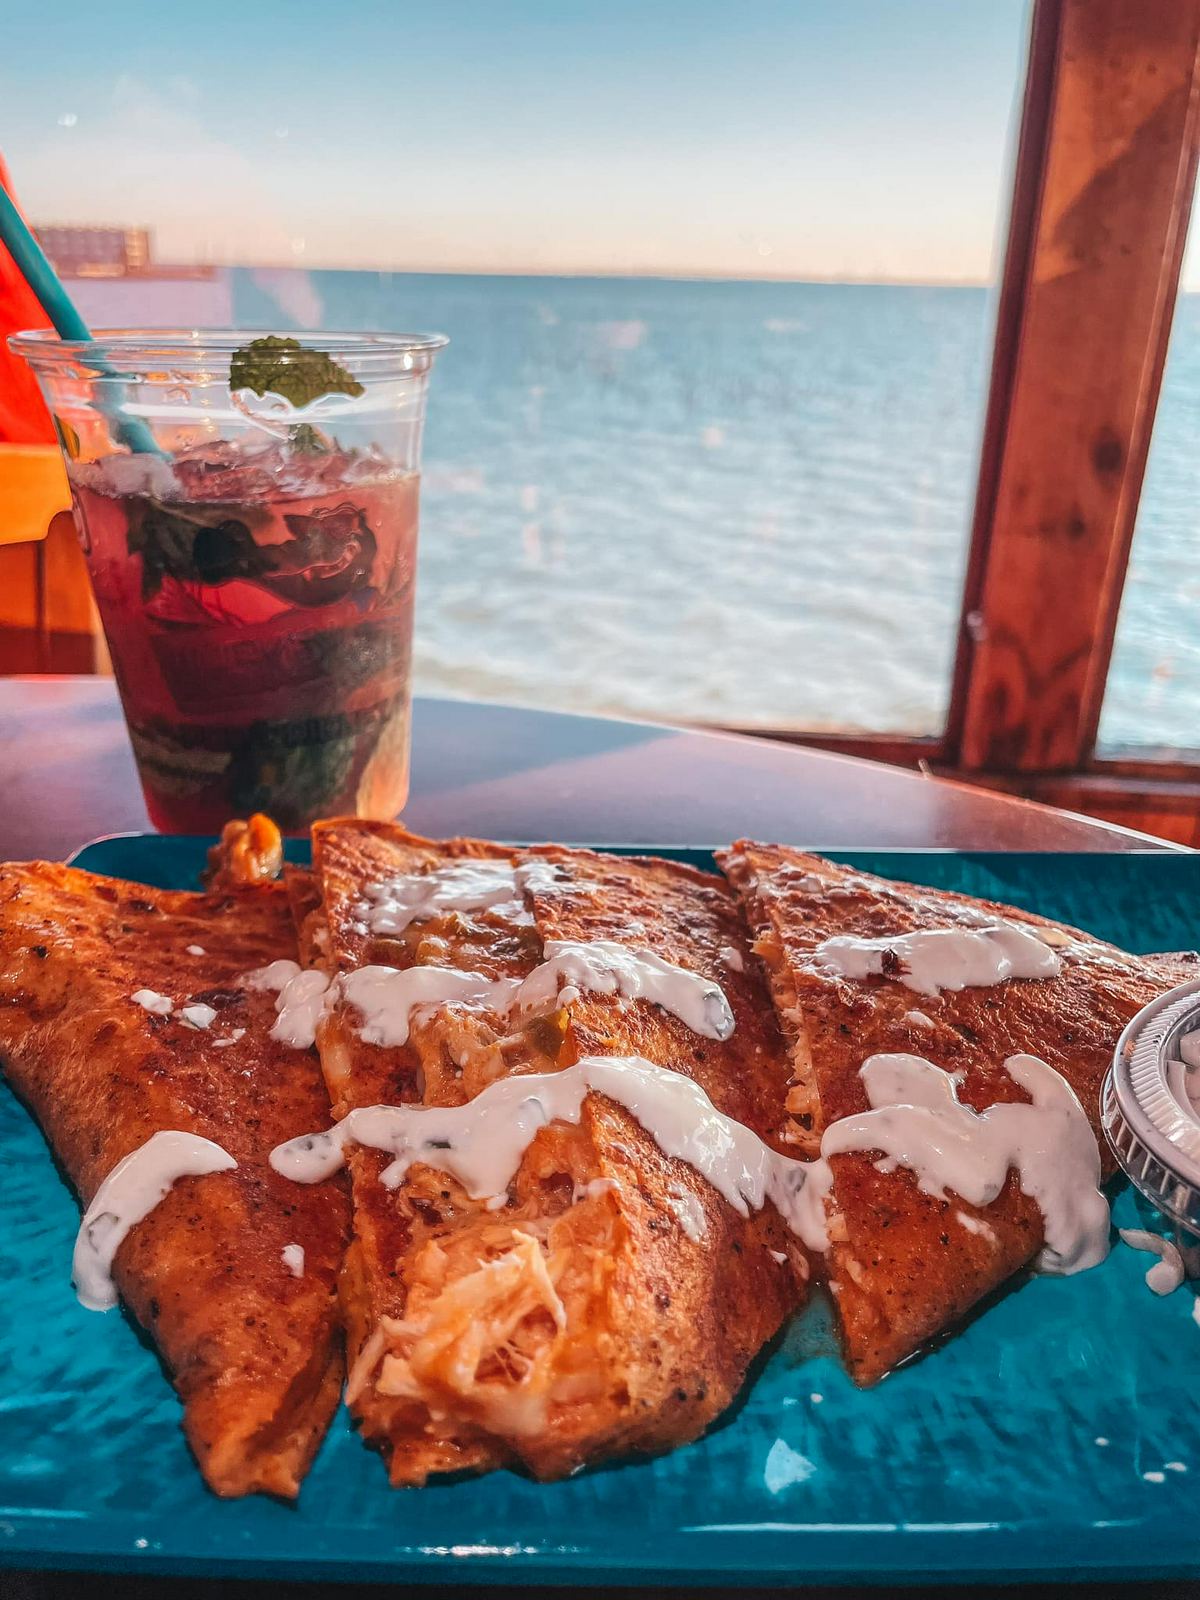 Buffalo chicken quesadilla and mojito from Whiskey Joes in Tampa